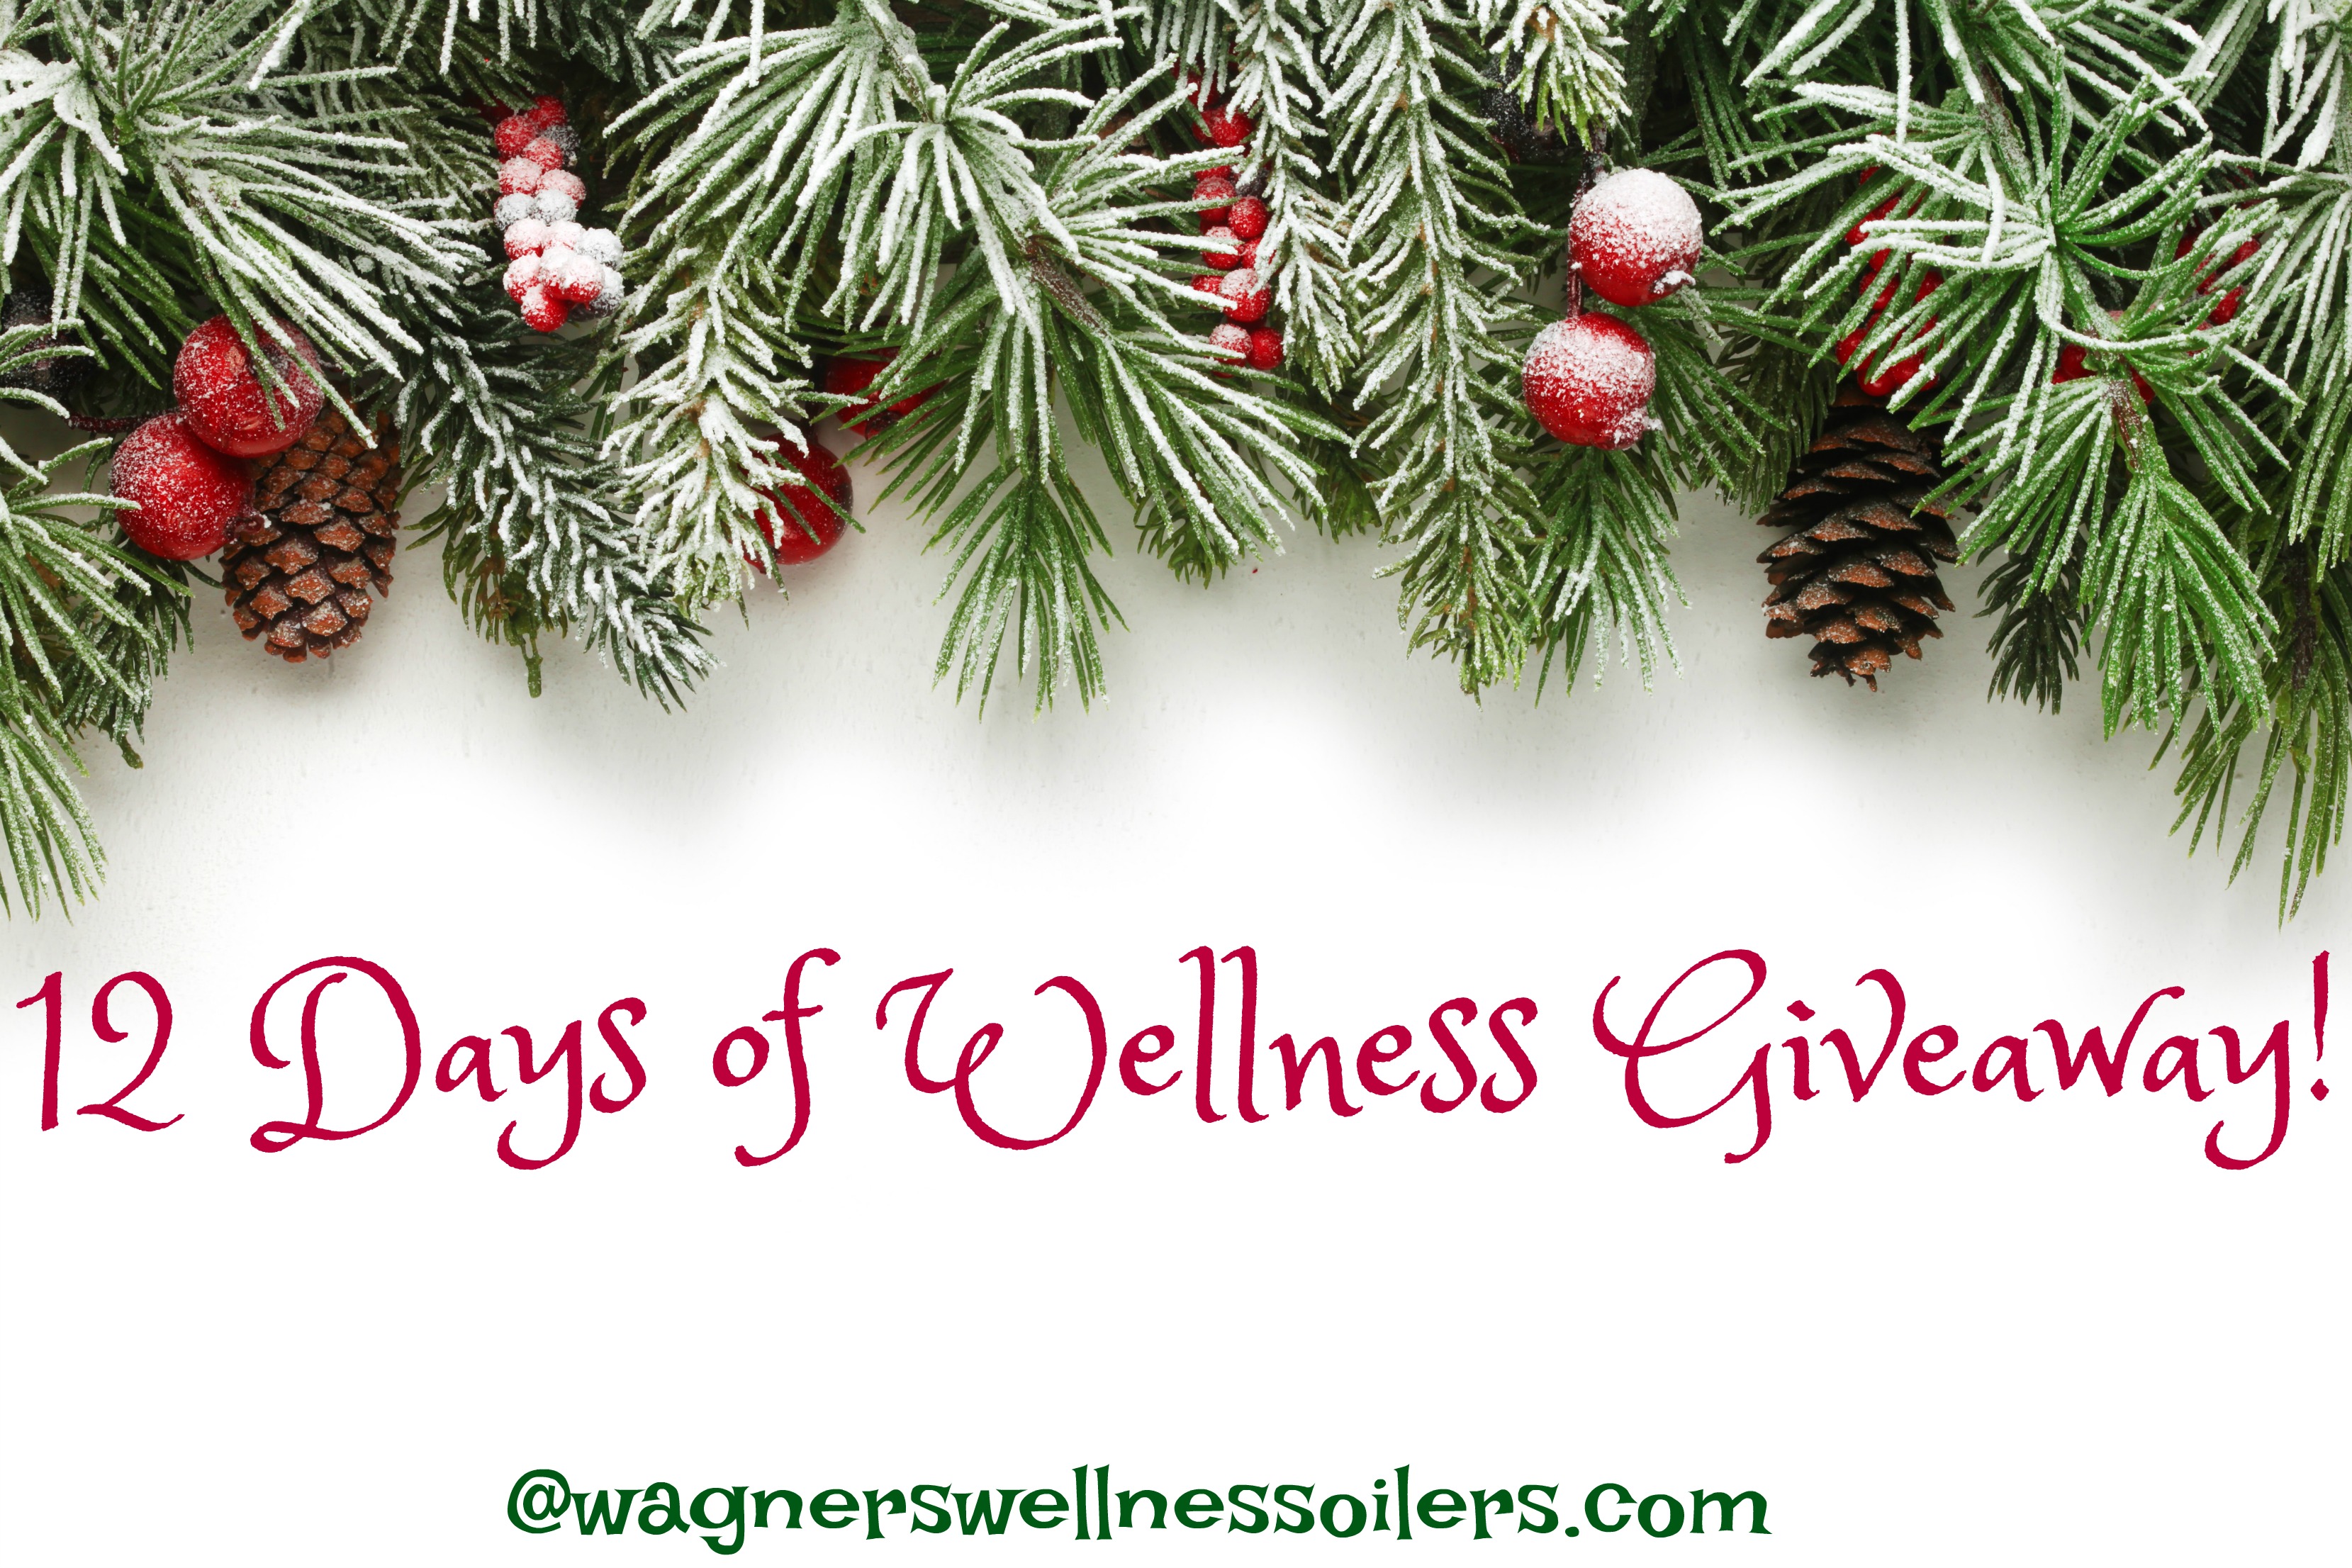 12 Days of Wellness Giveaway